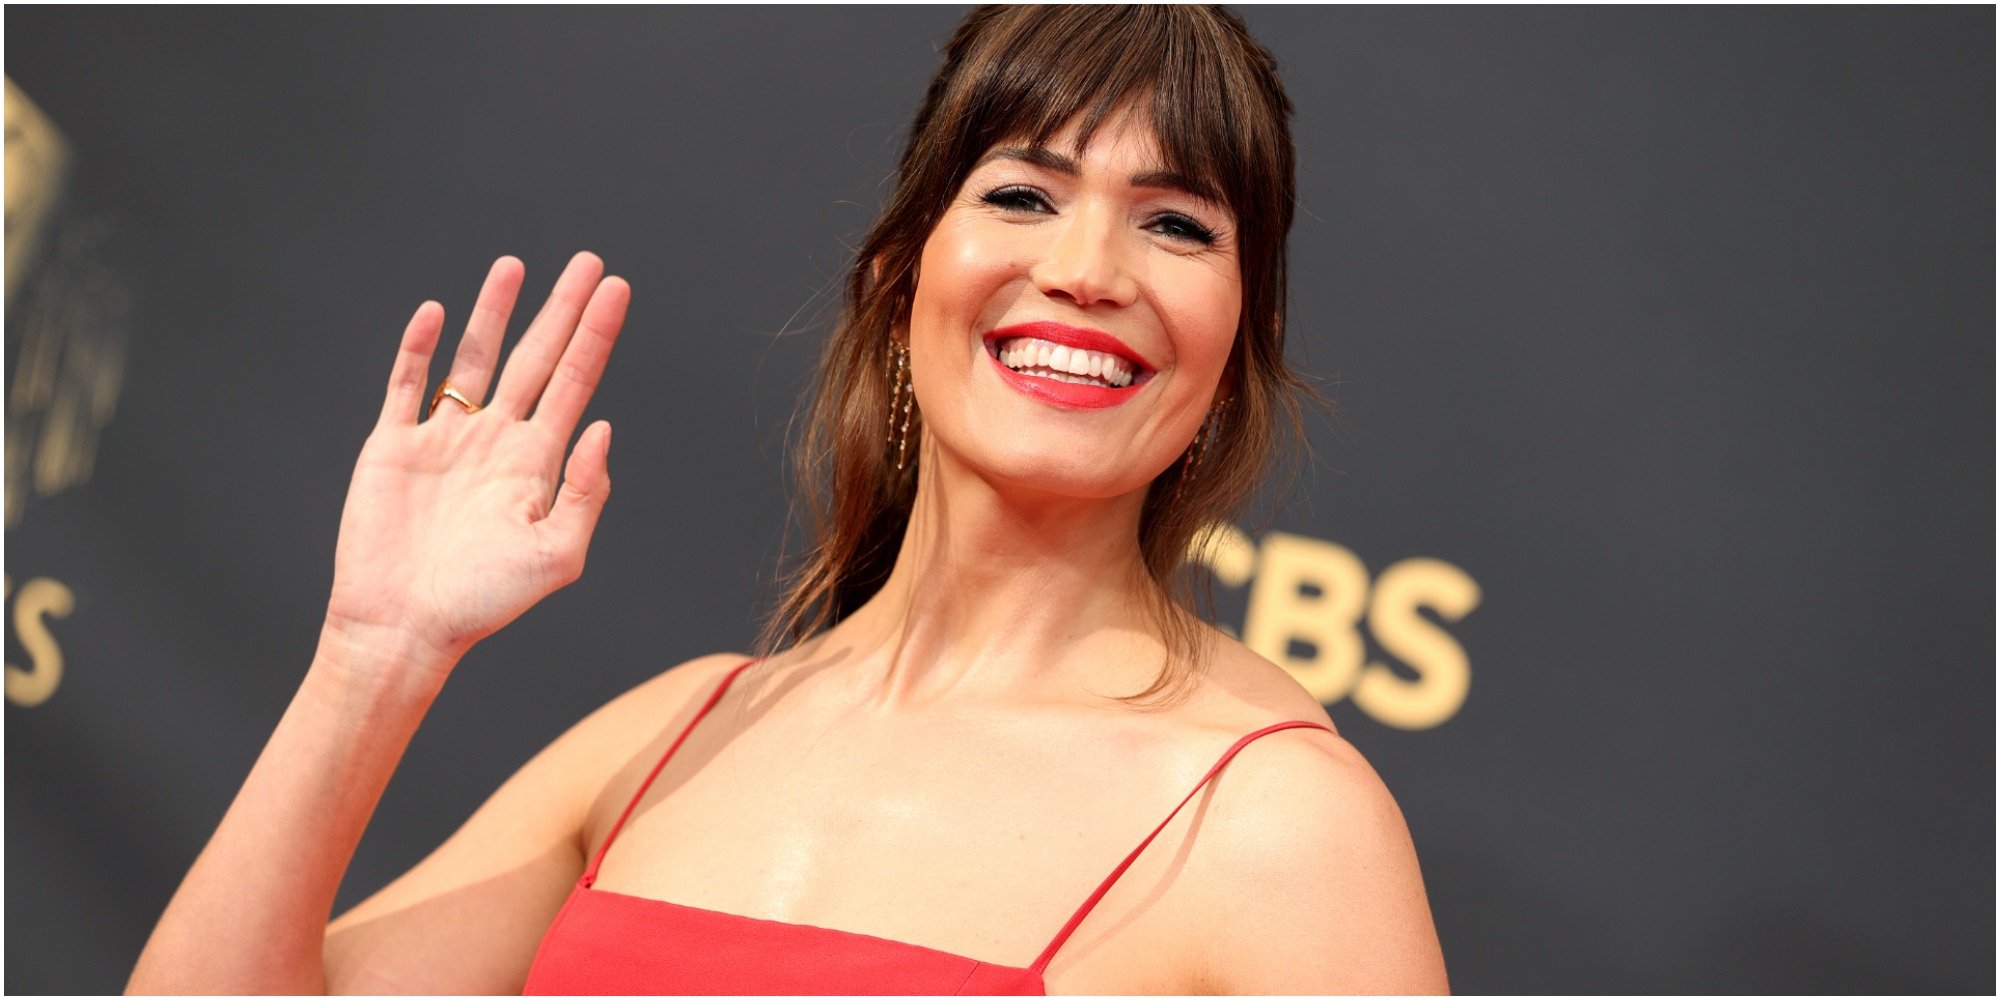 Mandy Moore on the red carpet at the 2021 Emmy Awards